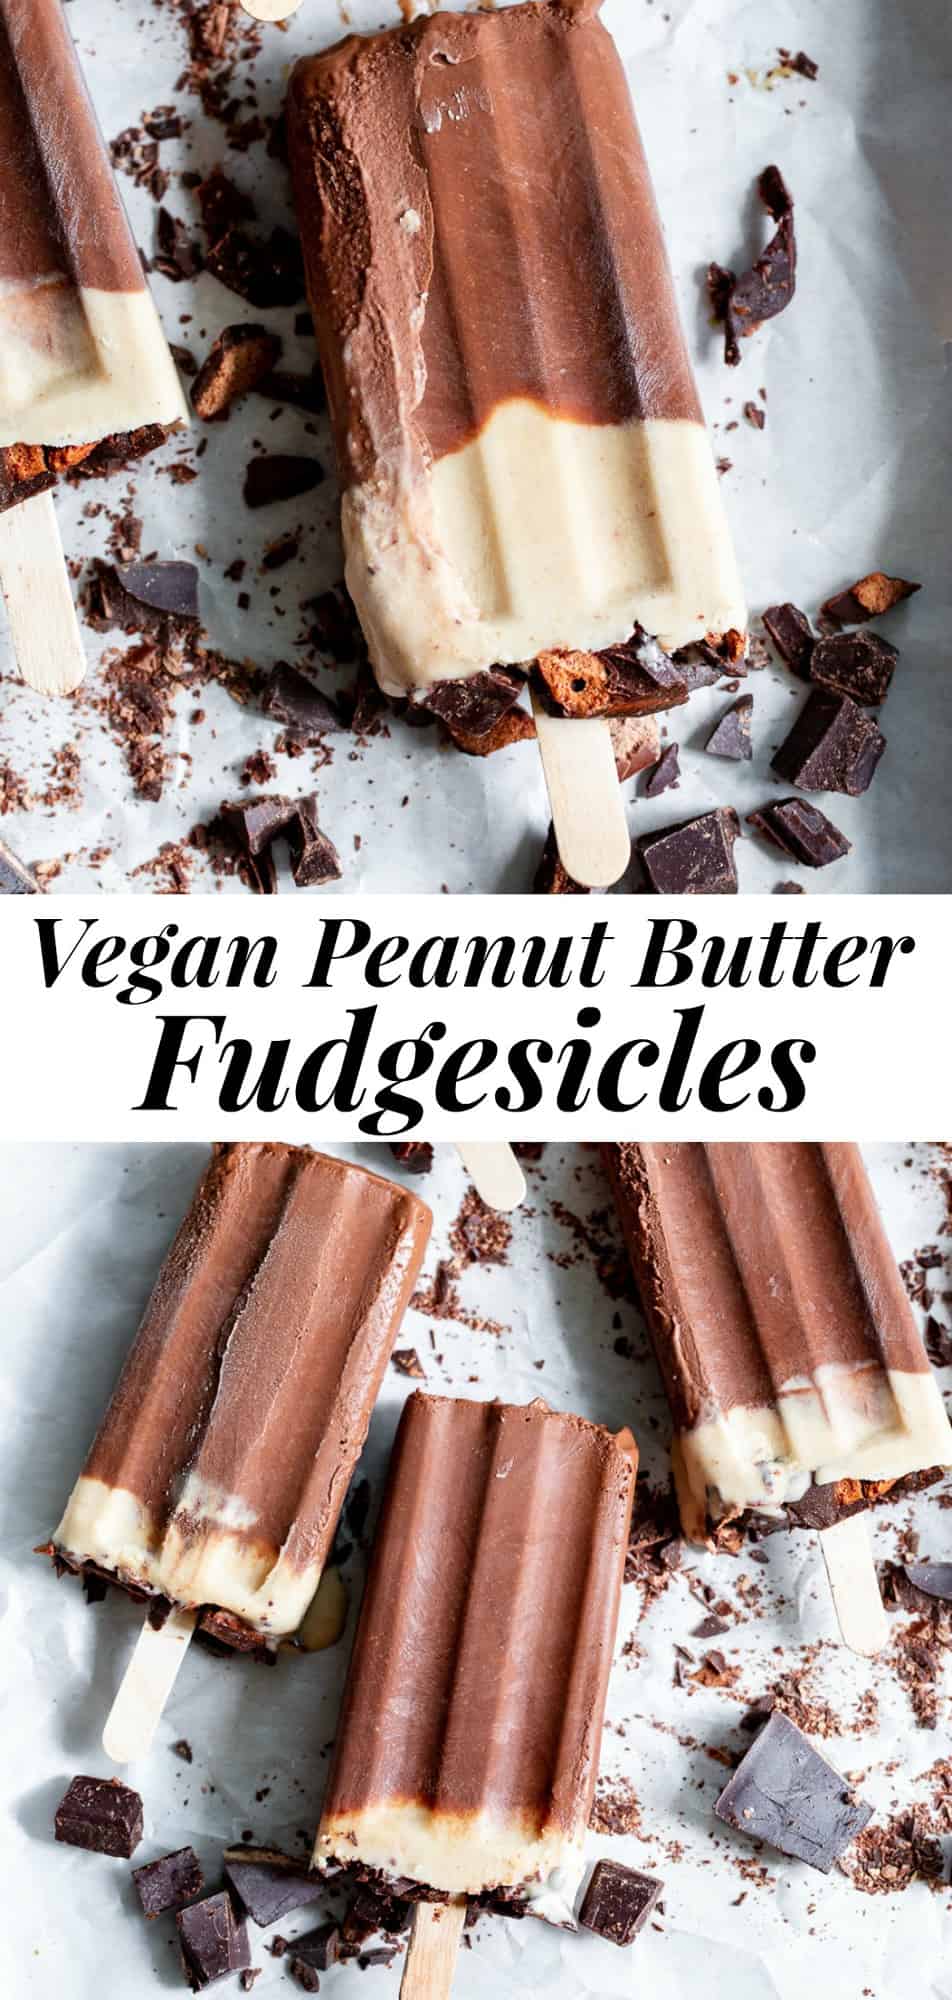 These chocolate peanut butter fudgesicles are just what you need for a healthy frozen treat!   Packed with rich chocolate flavor and a fudgy texture, they're dairy free, refined sugar free, vegan and paleo.   Easy to make in a blender and family approved! #vegan #paleo #peanutbutter #fudgesicles #popsicles #dairyfree #cleaneating 